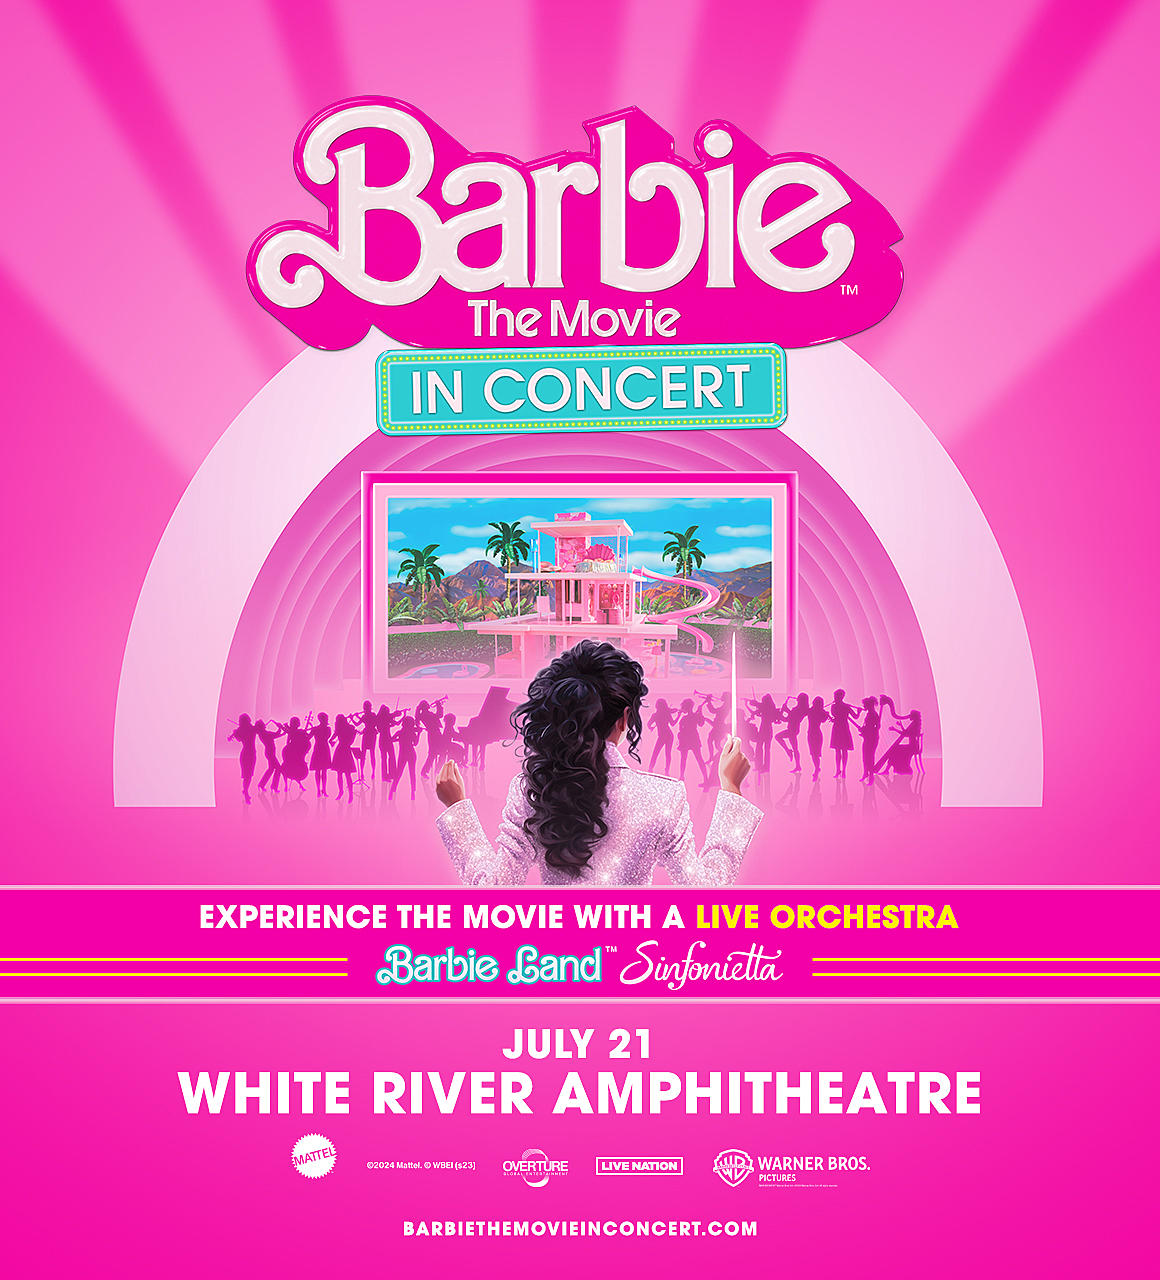 Barbie The Movie In Concert Coming to White River Amp in Auburn